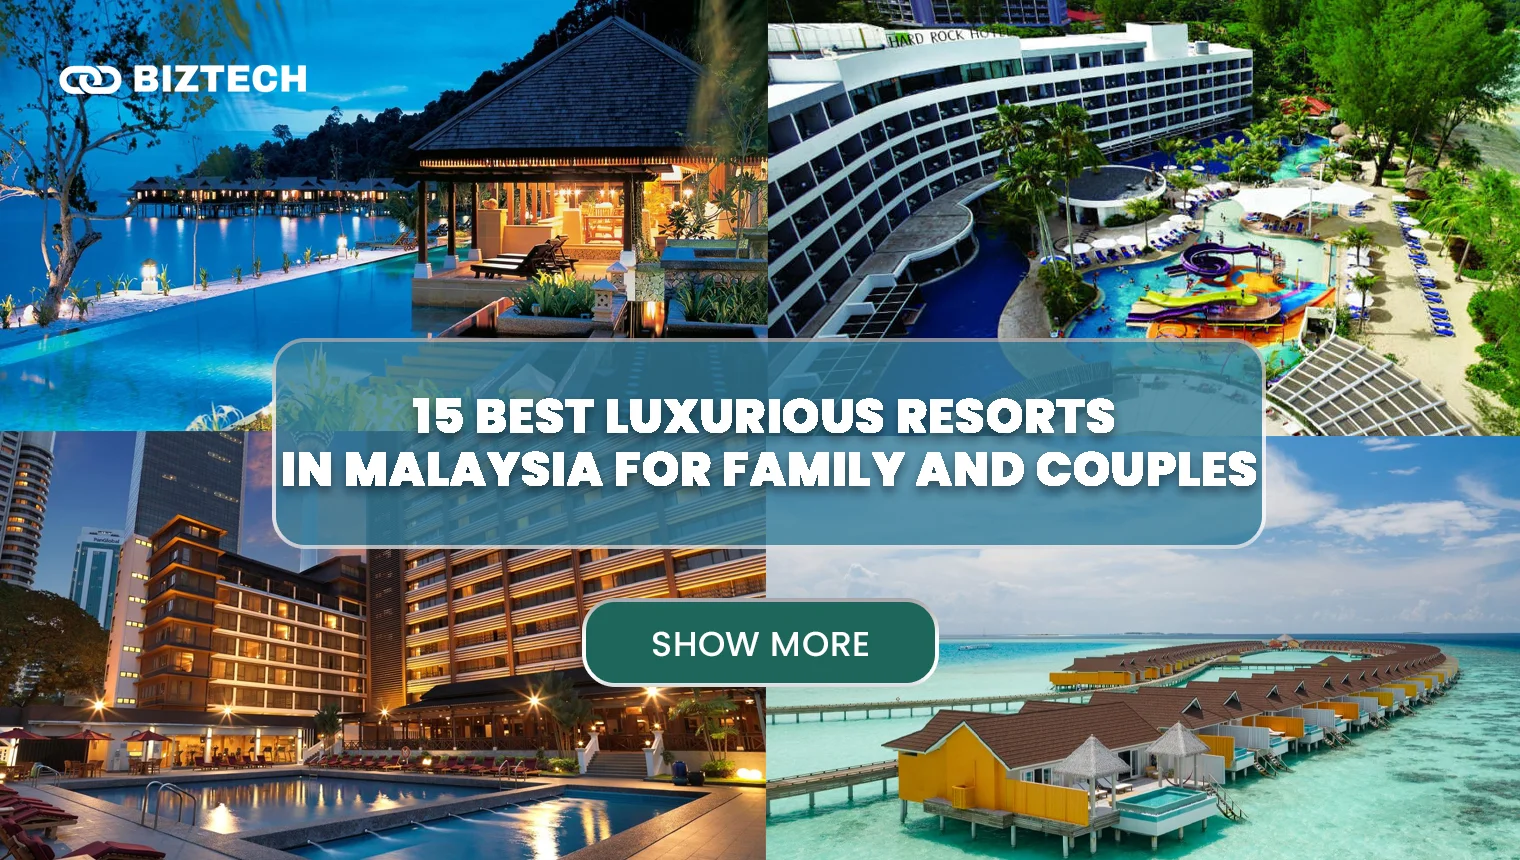 15 Best Luxurious Resorts in Malaysia For Family and Couples